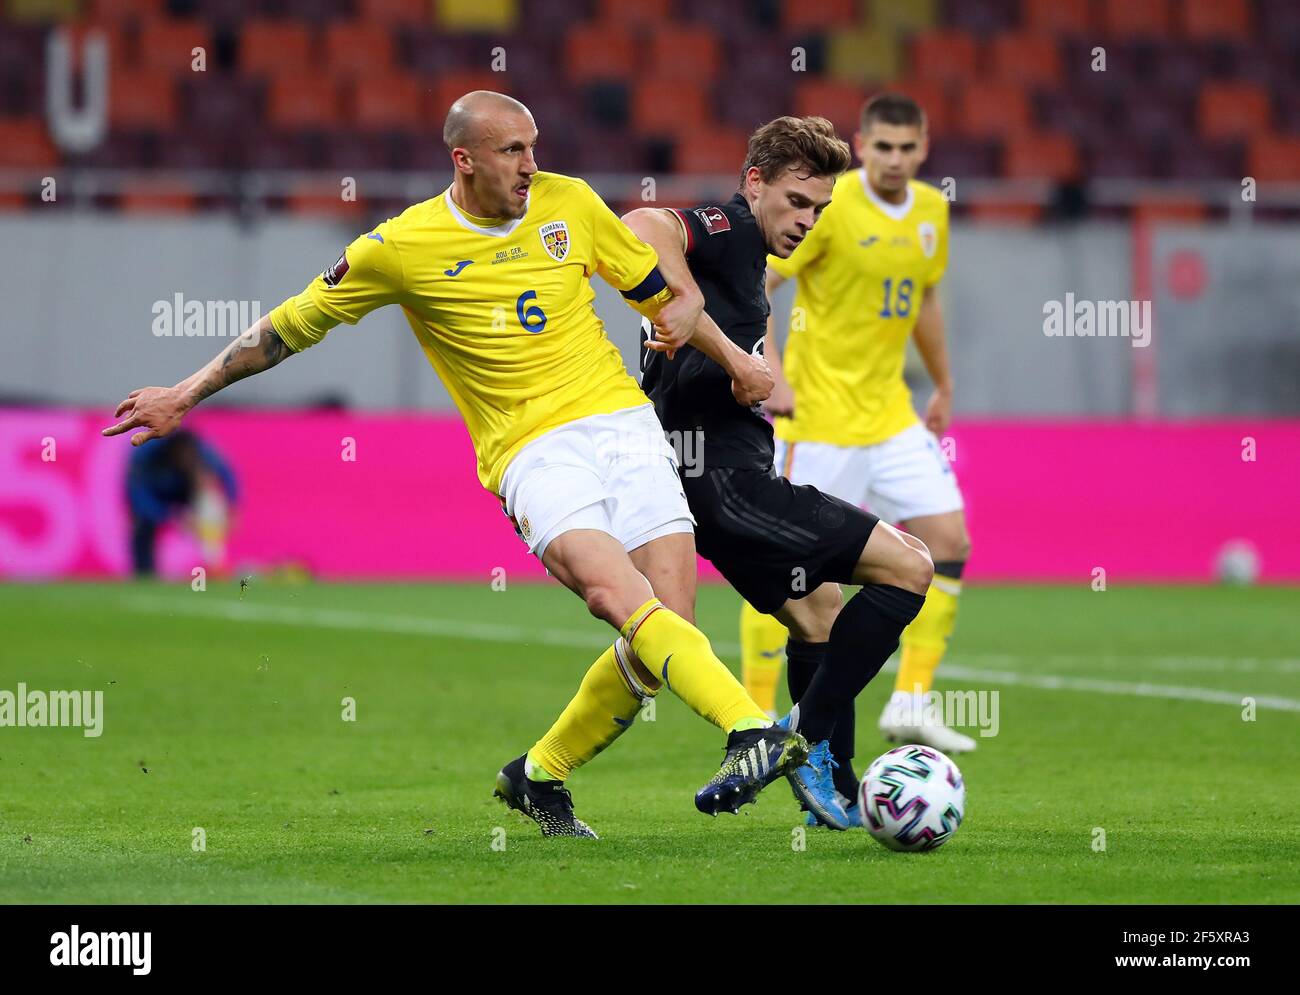 Bukarest, Romania. 28th Mar, 2021. Football: World Cup Qualification Europe, Romania - Germany, Group Stage, Group J, Matchday 2 at Arena Nationala. Germany's Joshua Kimmich (m) and Romania's Vlad Chiriches (l) battle for the ball. IMPORTANT NOTE: In accordance with the regulations of the DFL Deutsche Fußball Liga and the DFB Deutscher Fußball-Bund, it is prohibited to use or have used photographs taken in the stadium and/or of the match in the form of sequence pictures and/or video-like photo series. Credit: Stefan Constantin/dpa/Alamy Live News Stock Photo